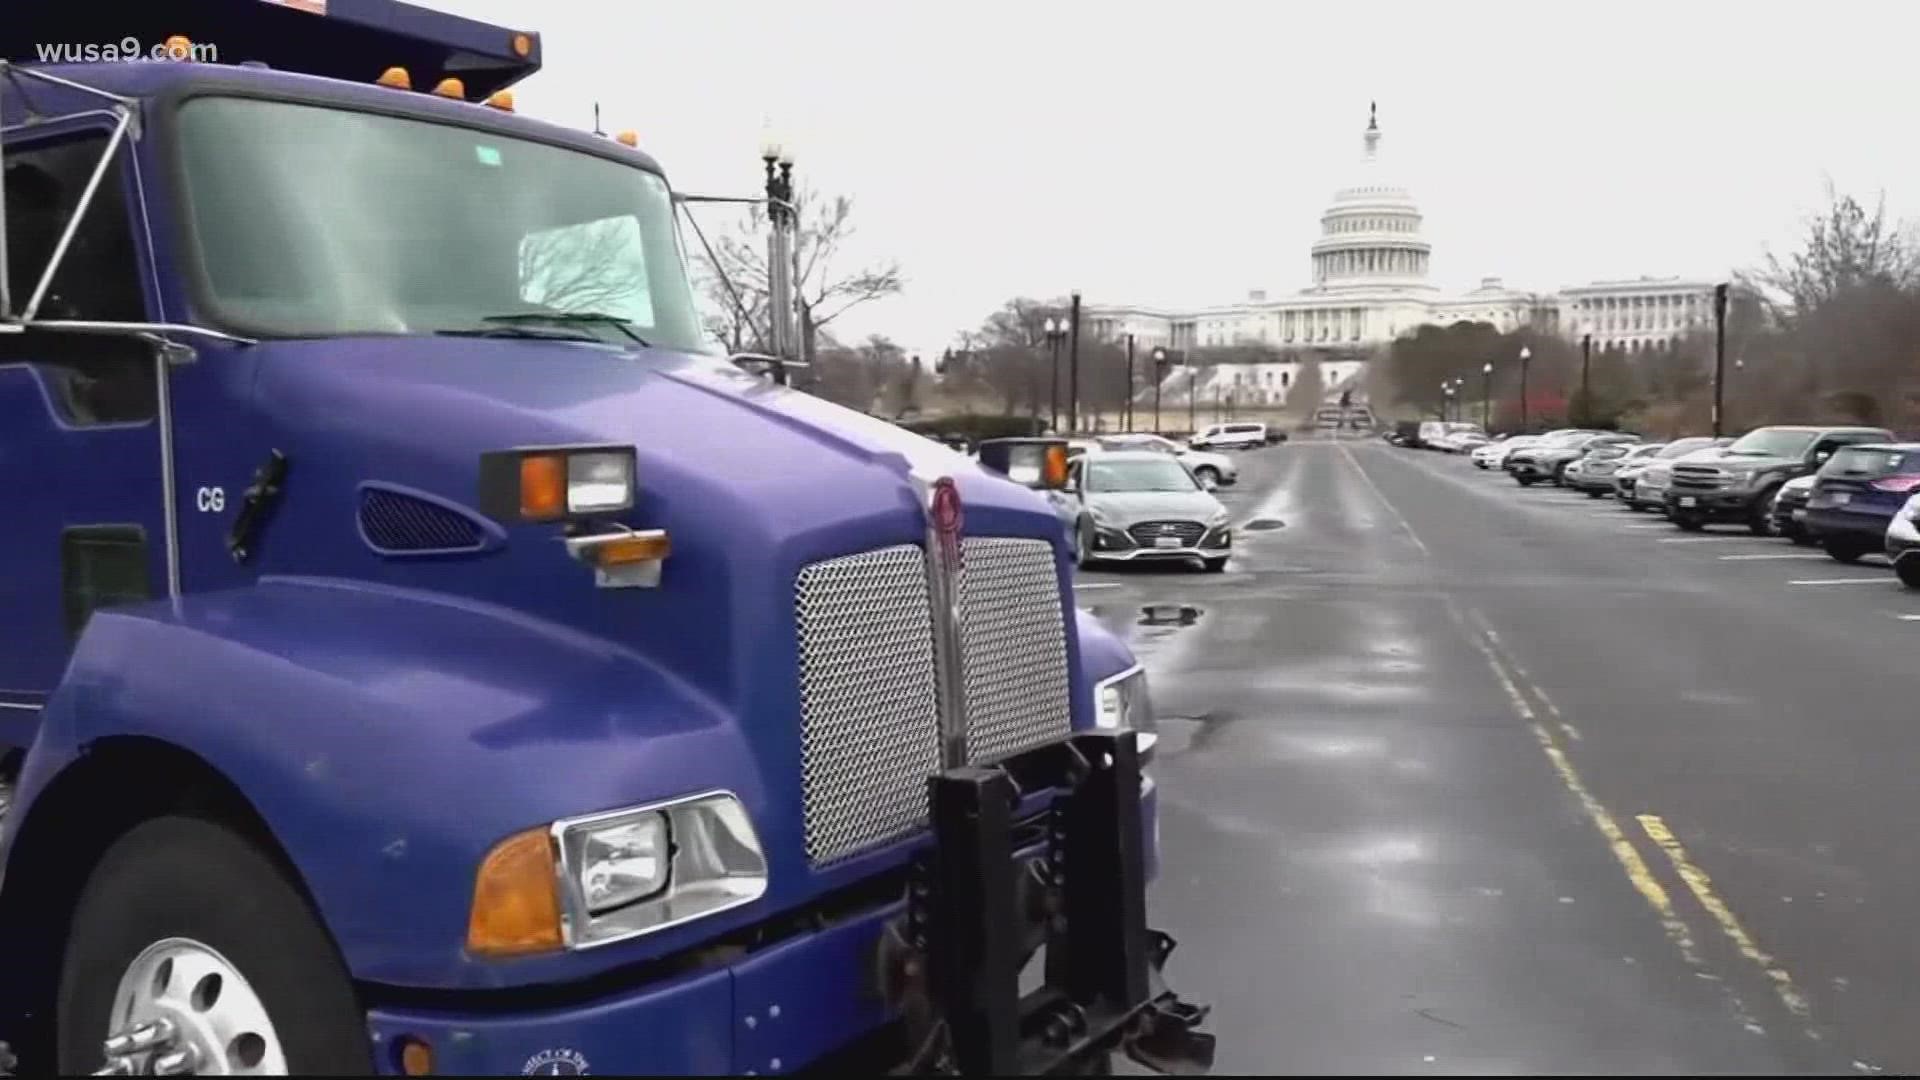 Del. Eleanor Holmes Norton met with U.S. Capitol Police to discuss security measures for truck convoy protests in D.C.